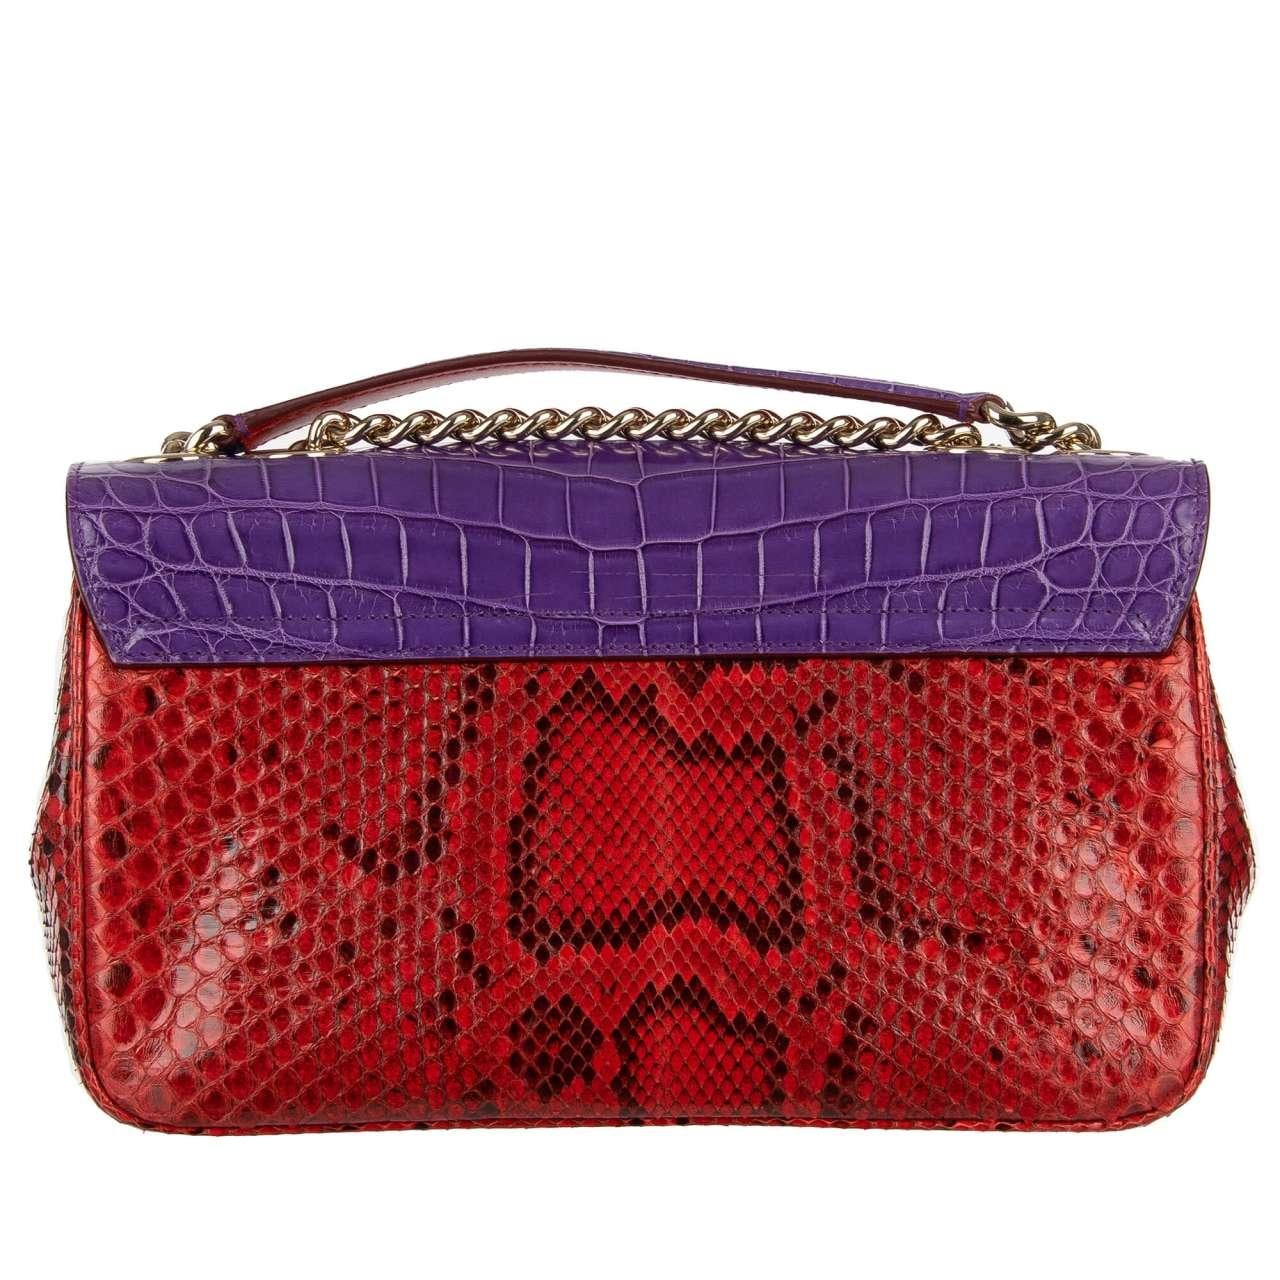 Women's D&G Croco Snake Leather Shoulder Bag LUCIA with Chain Strap Red Purple For Sale